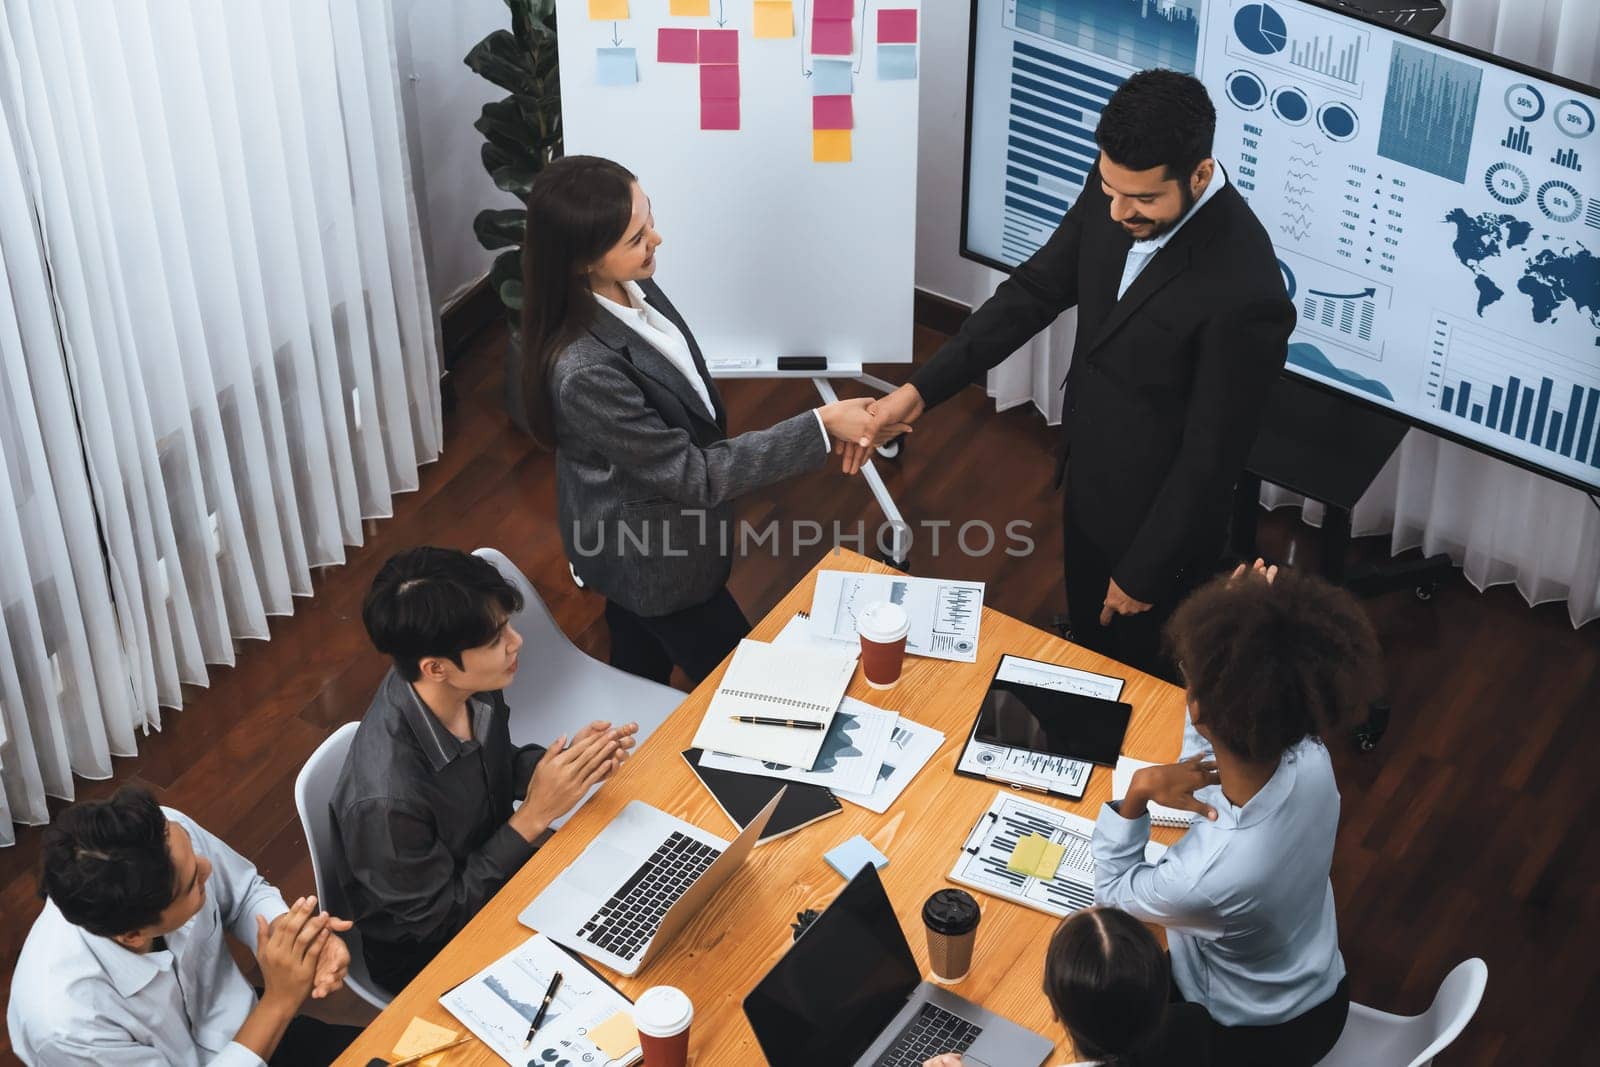 Diverse coworker celebrate with handshake and teamwork in corporate workplace. Happy business people united by handshaking after successful meeting or business presentation on data analysis. Concord